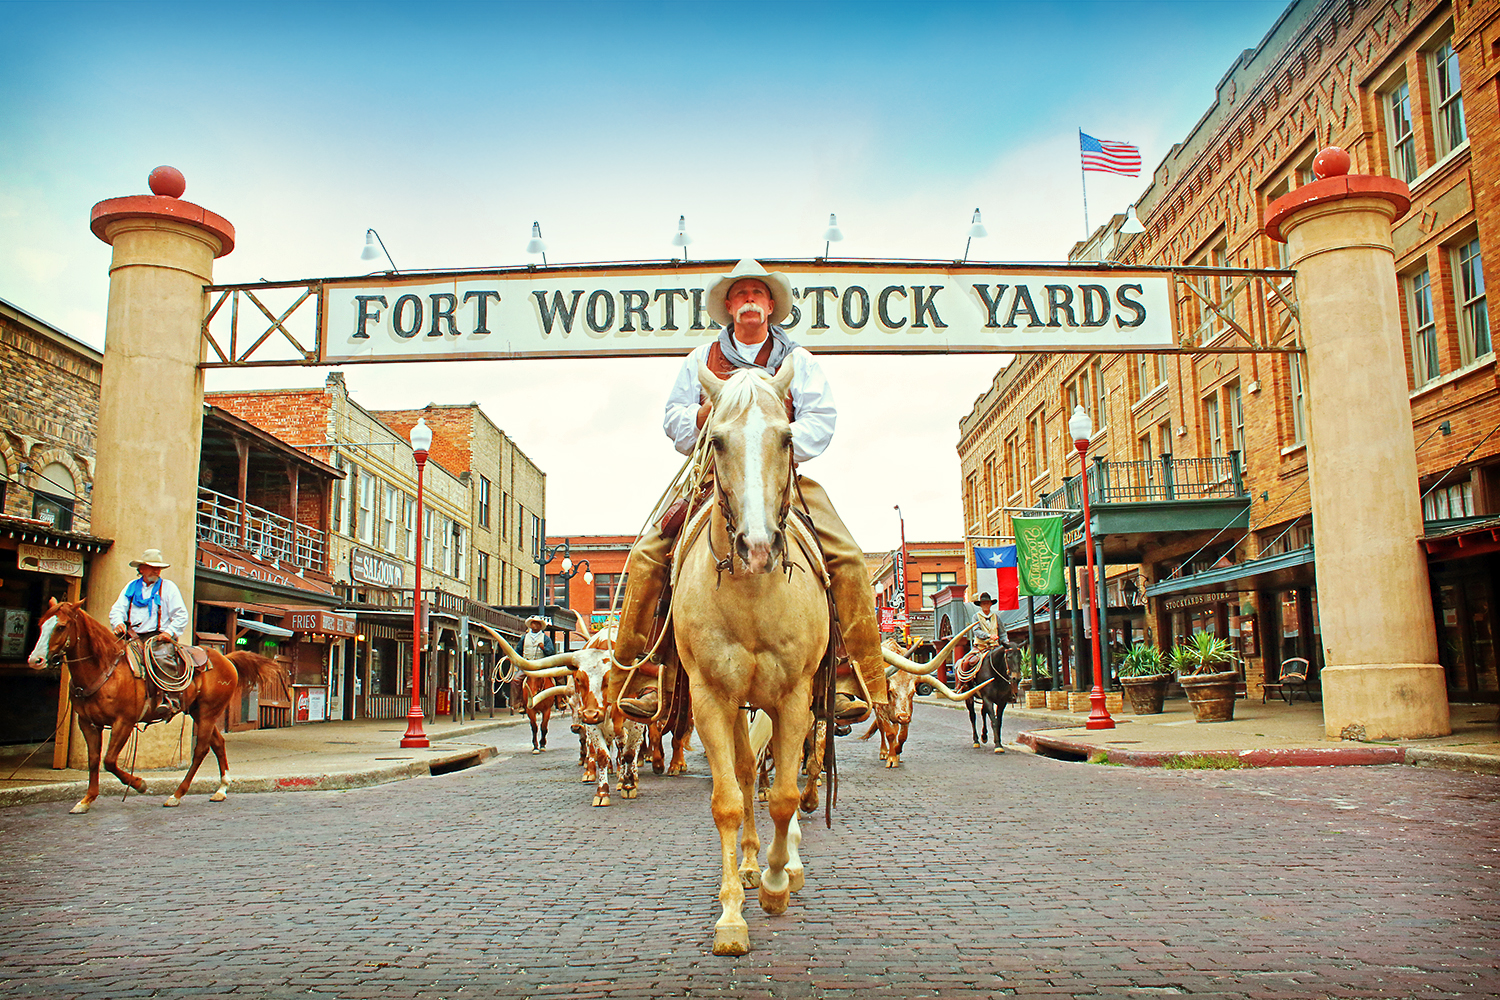 Fort Worth Stockyard cowboy in front of sign.